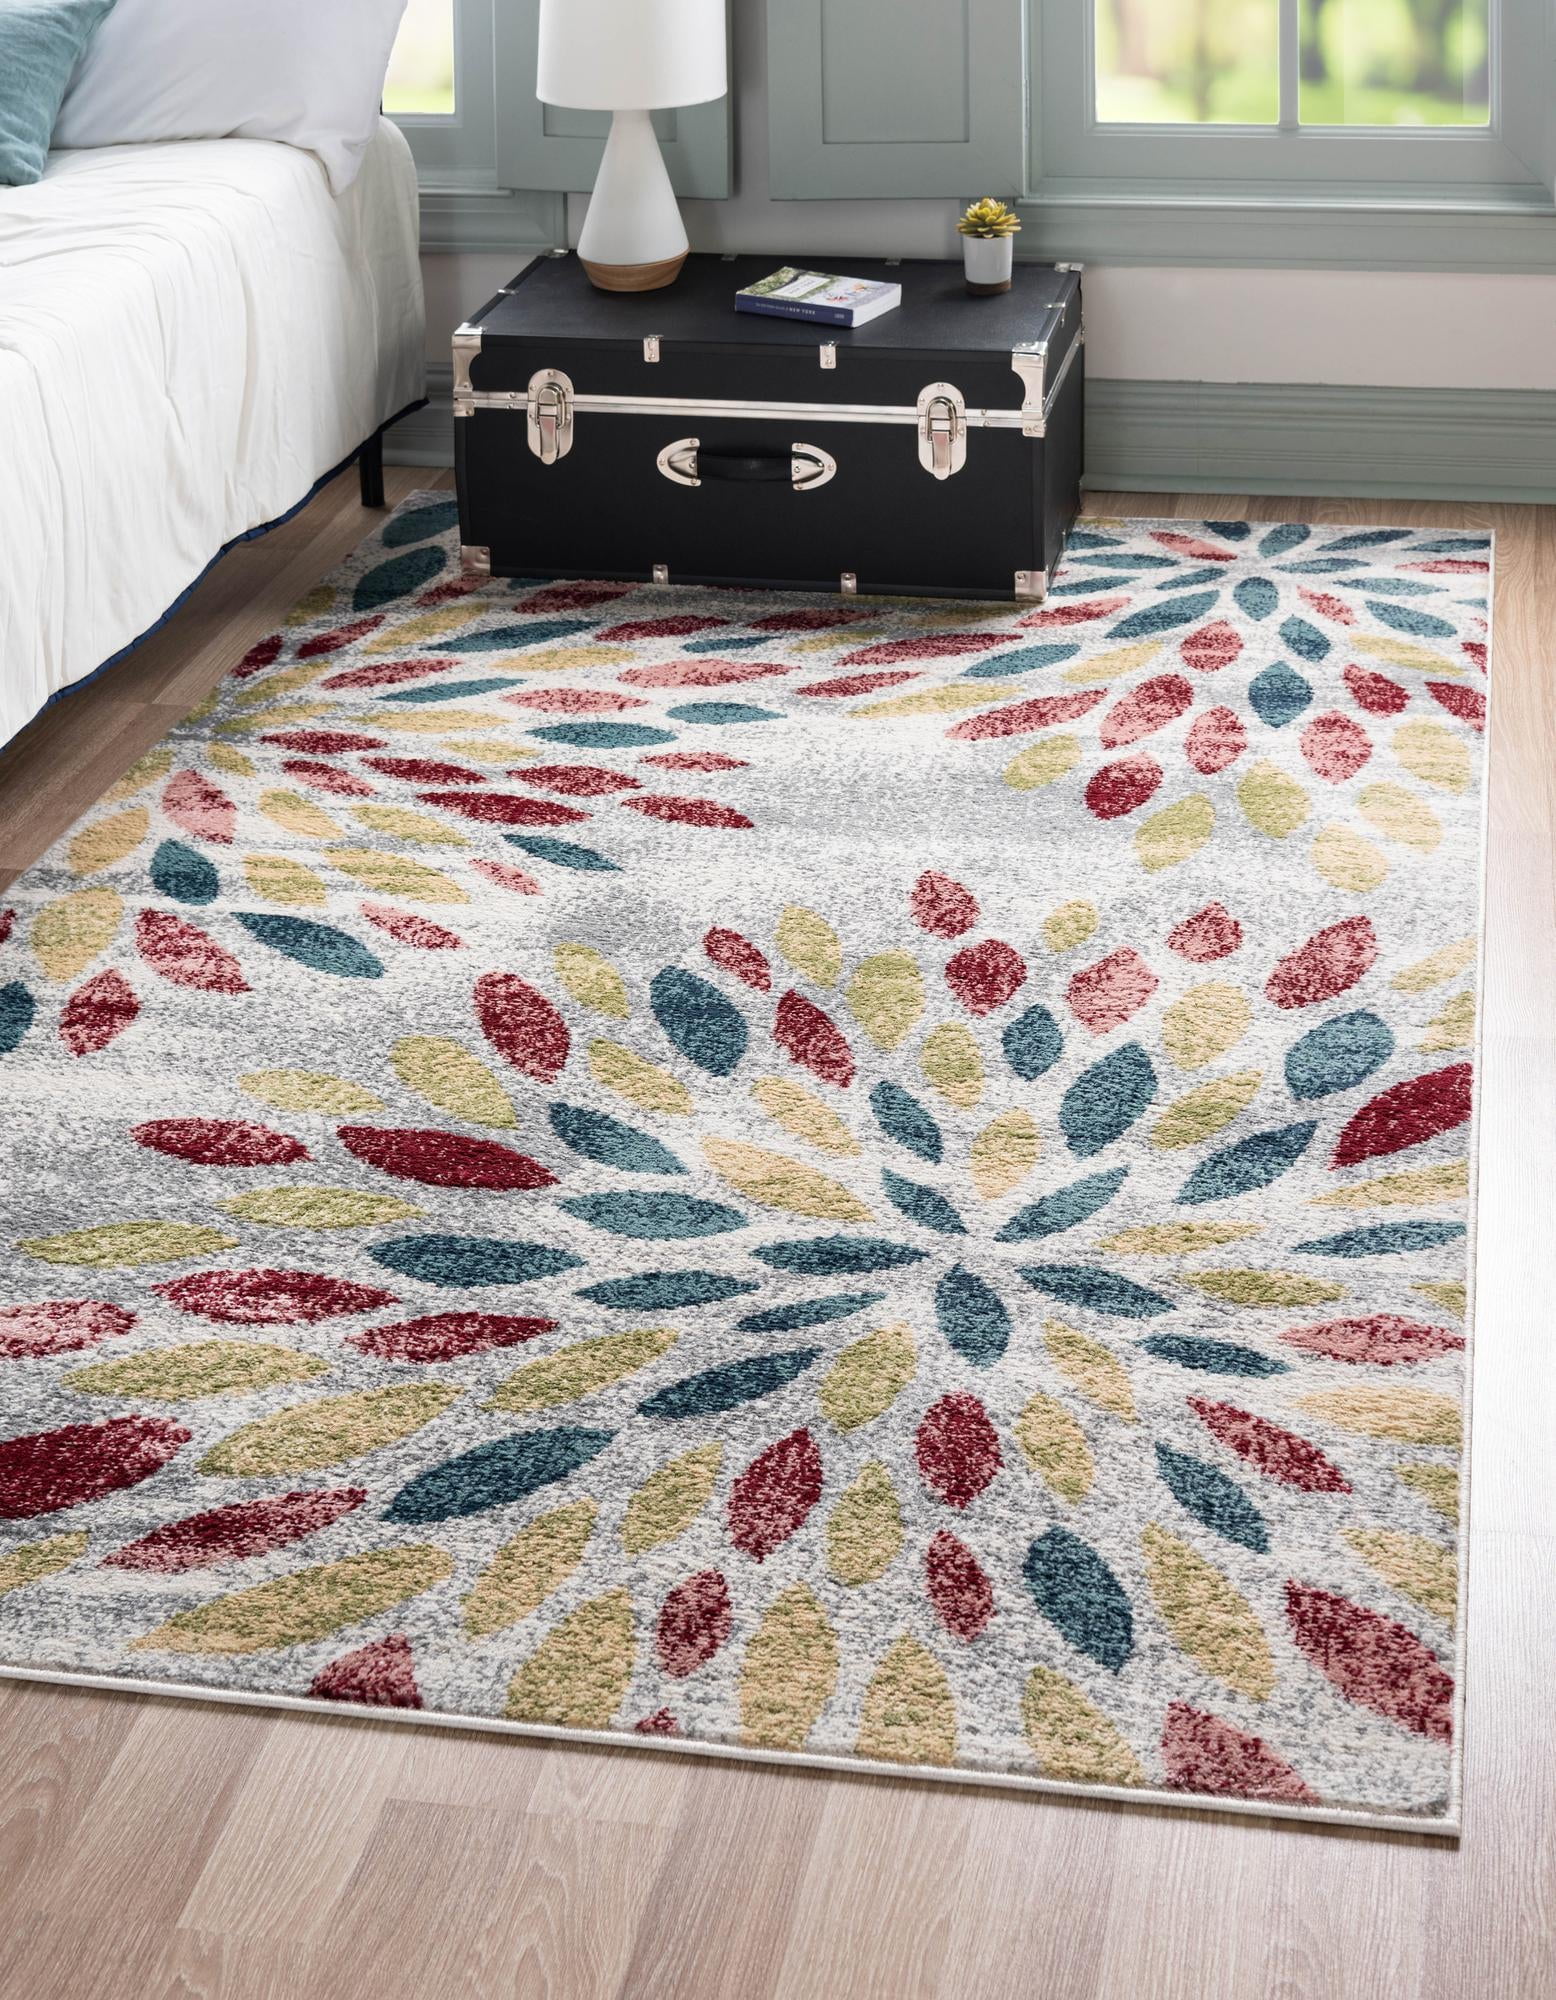 Open Floorplans Rugs.com Charleston Collection Rug 8' x 10' Green Low-Pile Rug Perfect for Living Rooms Large Dining Rooms